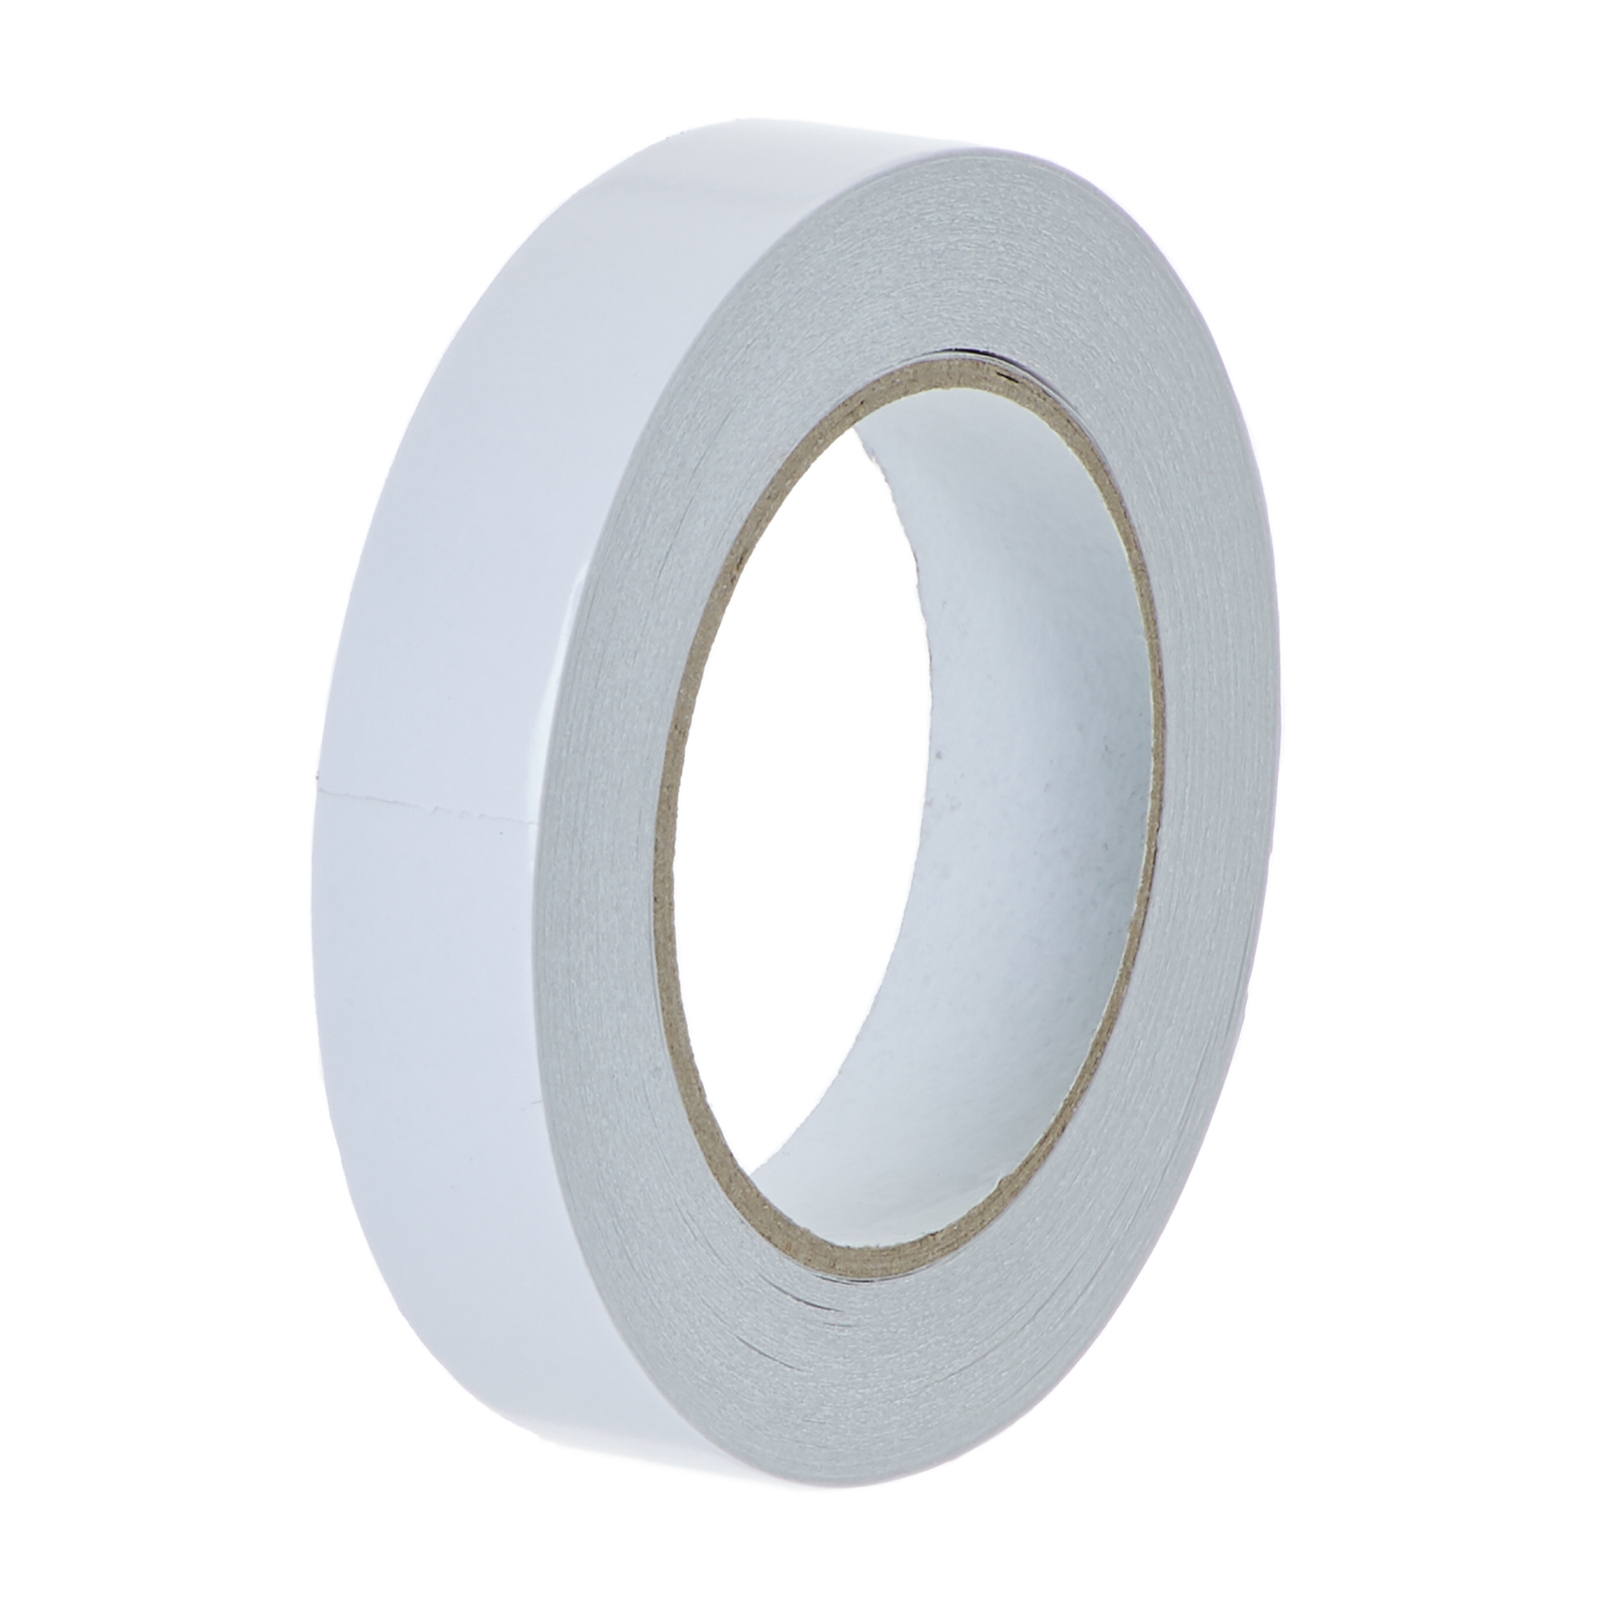 Classmates Double Sided Tape  24mm 33m Pack of 6 Findel 